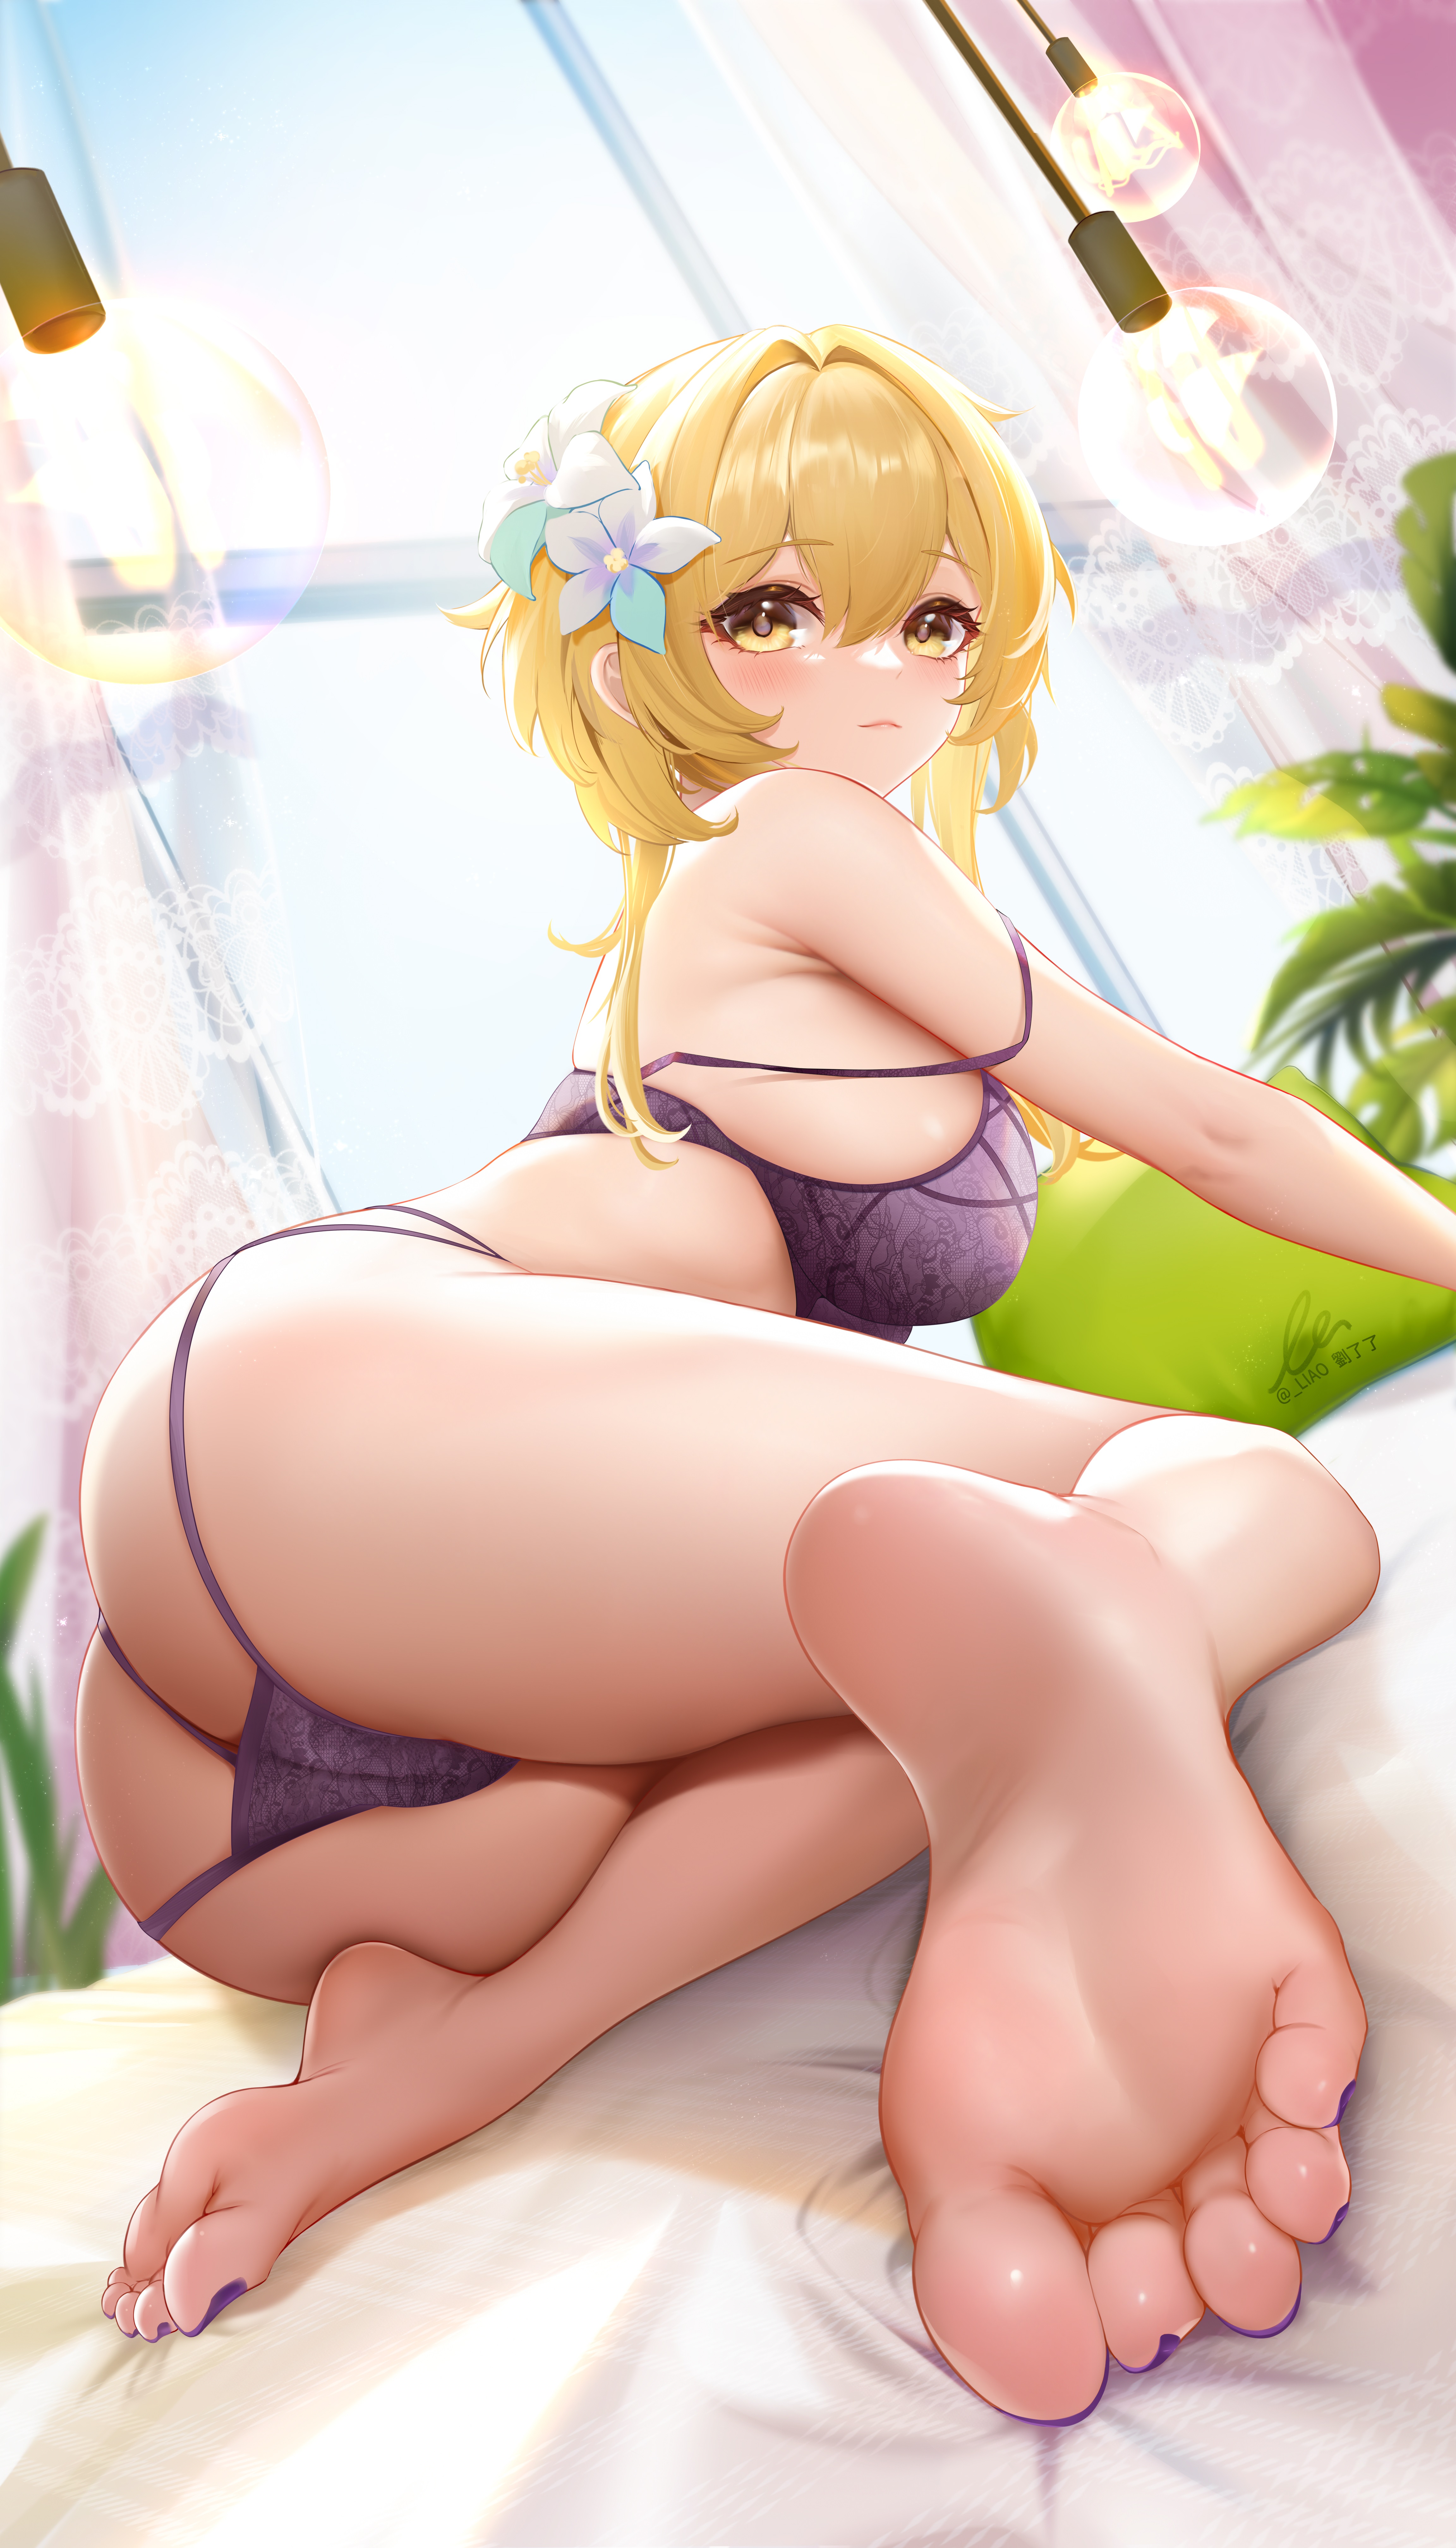 Anime 4609x8064 anime anime girls Lumine (Genshin Impact) Genshin Impact blonde lingerie yellow eyes panties low-angle purple panties blushing looking back boobs looking at viewer feet squatting purple nails foot fetishism sideboob flower in hair in bed lace lingerie arm support plants rear view ass purple bra